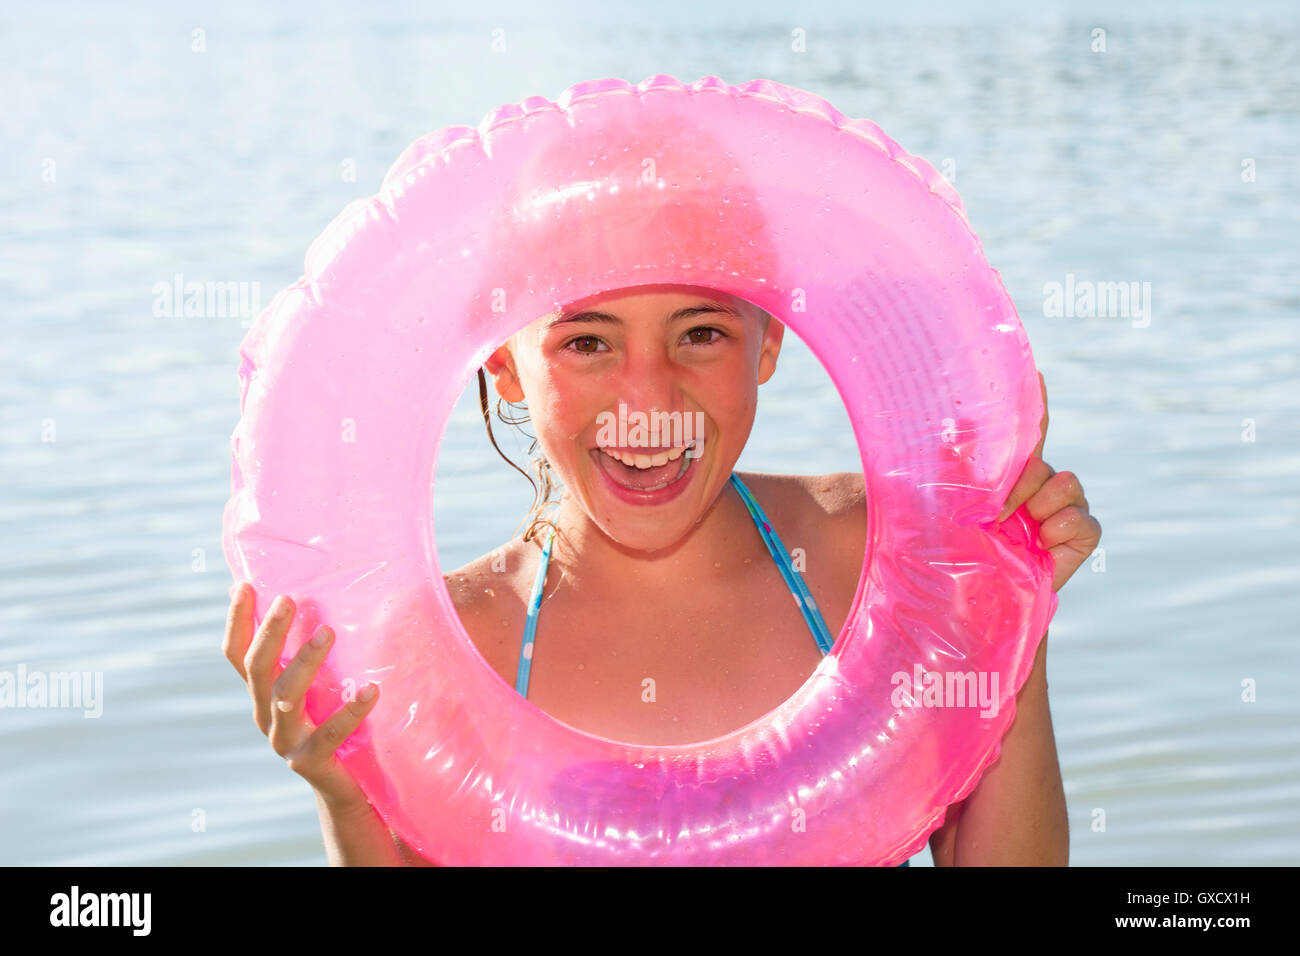 Portrait of girl holding pink inflatable ring in Lake Seeoner See, Bavaria, Germany Stock Photo